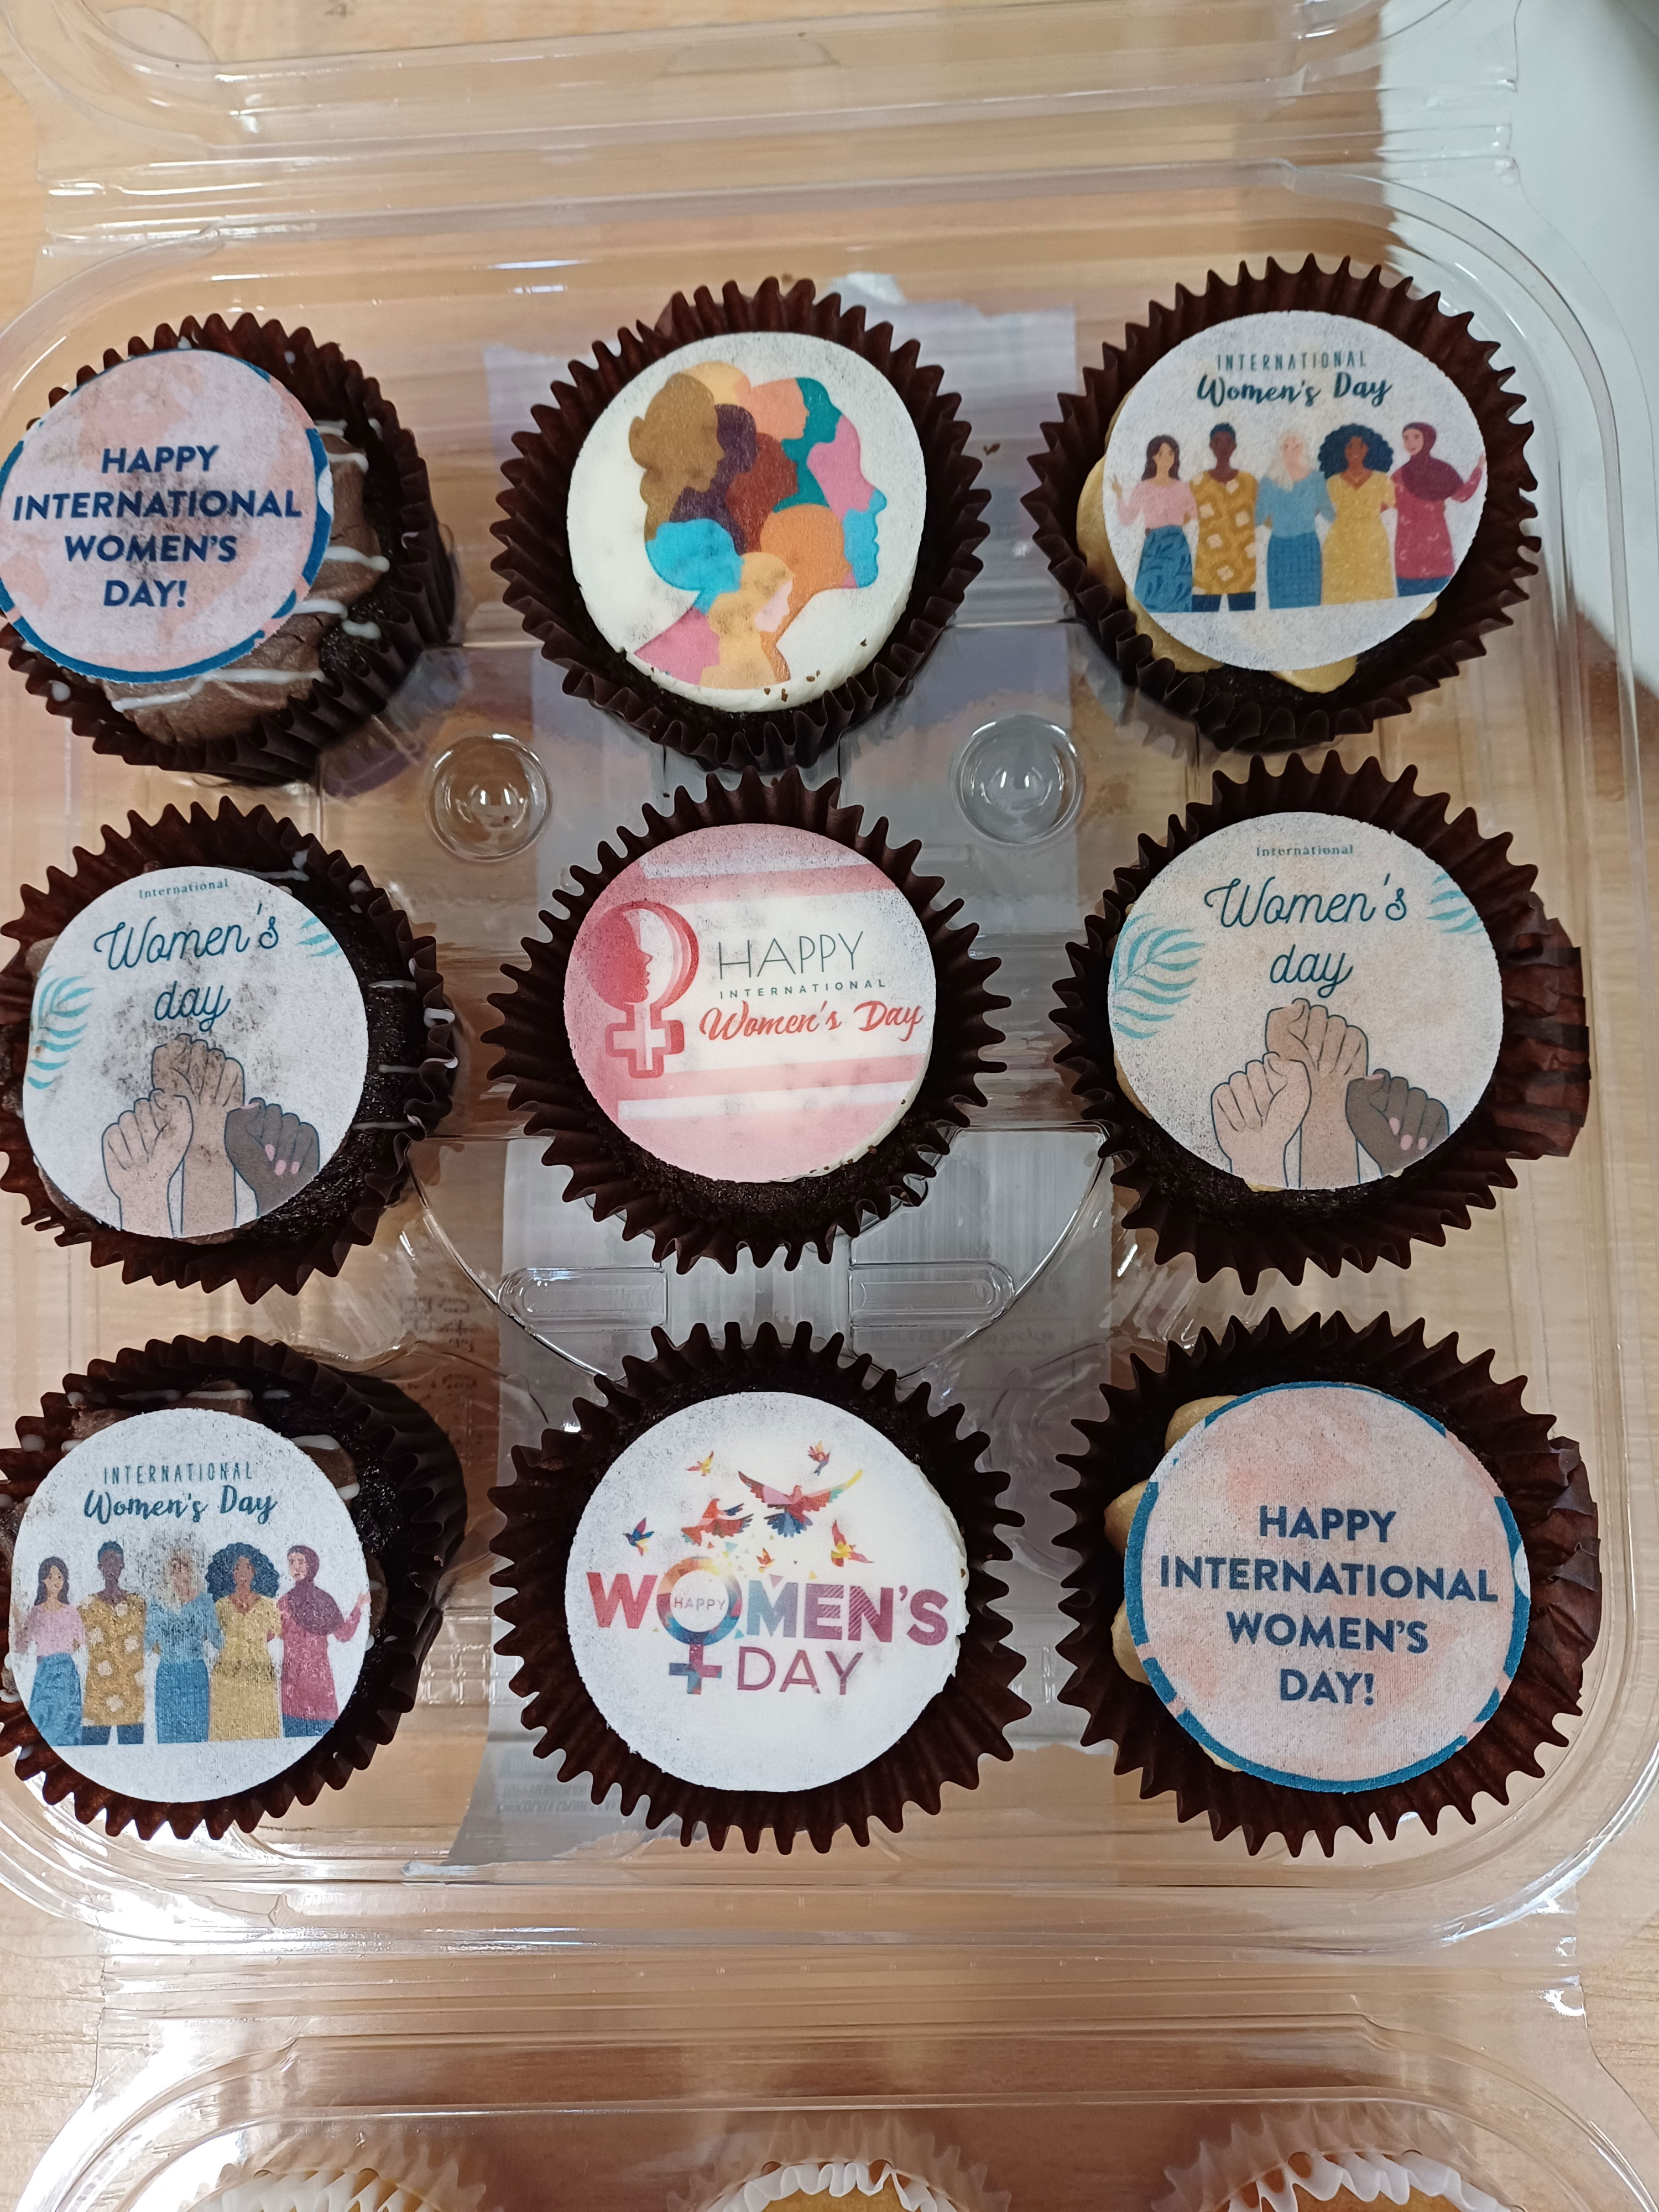 Cupcakes decorated for International Women's Day